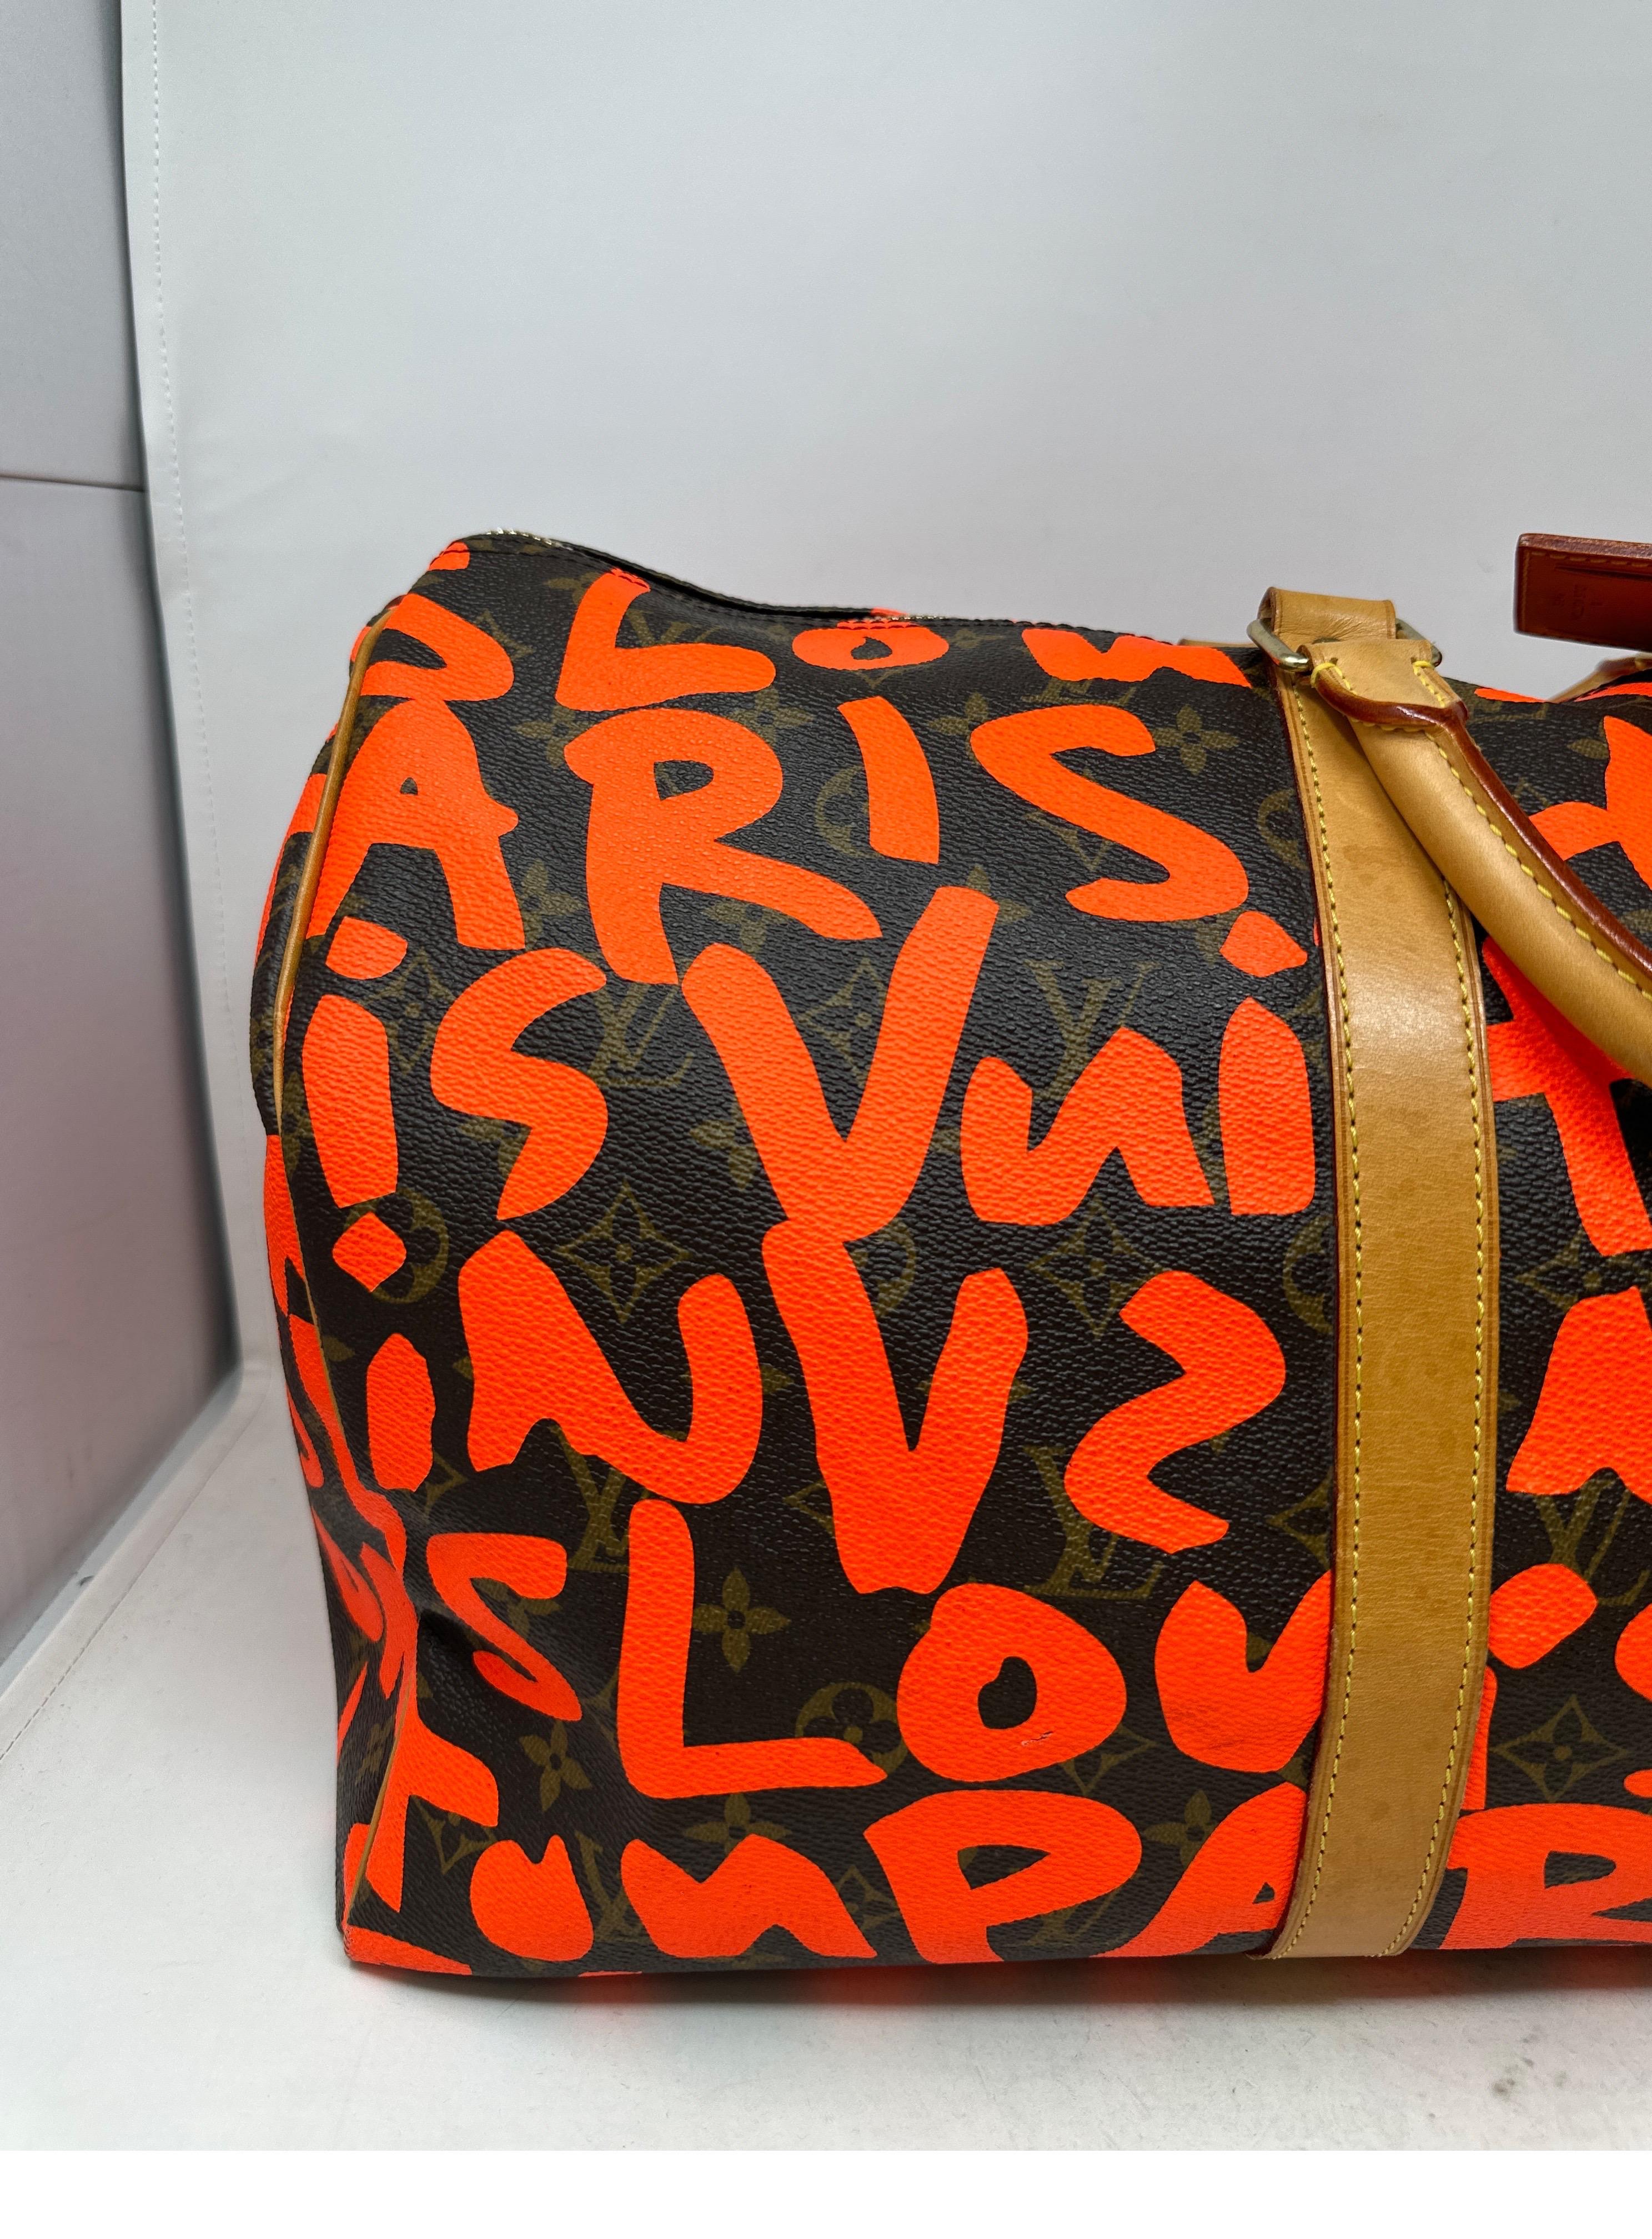 Louis Vuitton Orange Graffiti Keepall 50 Bag. Stephen Sprouse designed for Louis Vuitton duffle. Good condition. Light wear from normal use and age. Overall good condition. Interior clean. Light water mark inside. See photos please. Rare and iconic